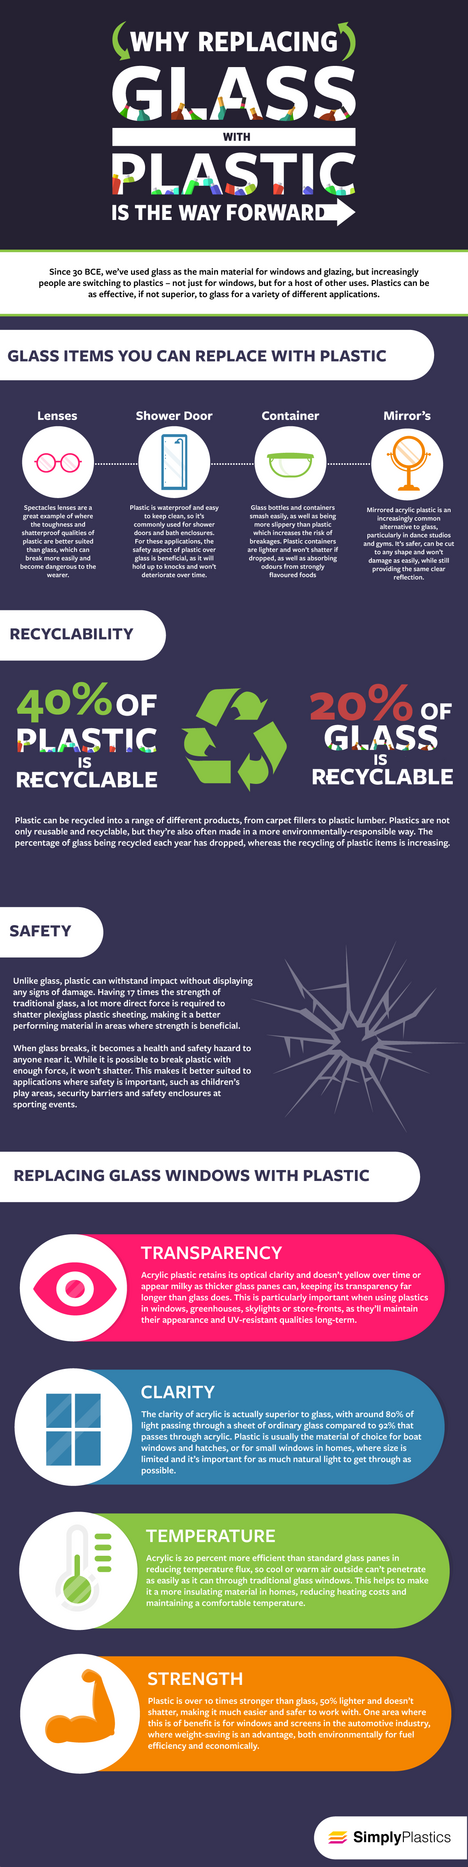 Why Replacing Glass With Plastic is the Way Forward